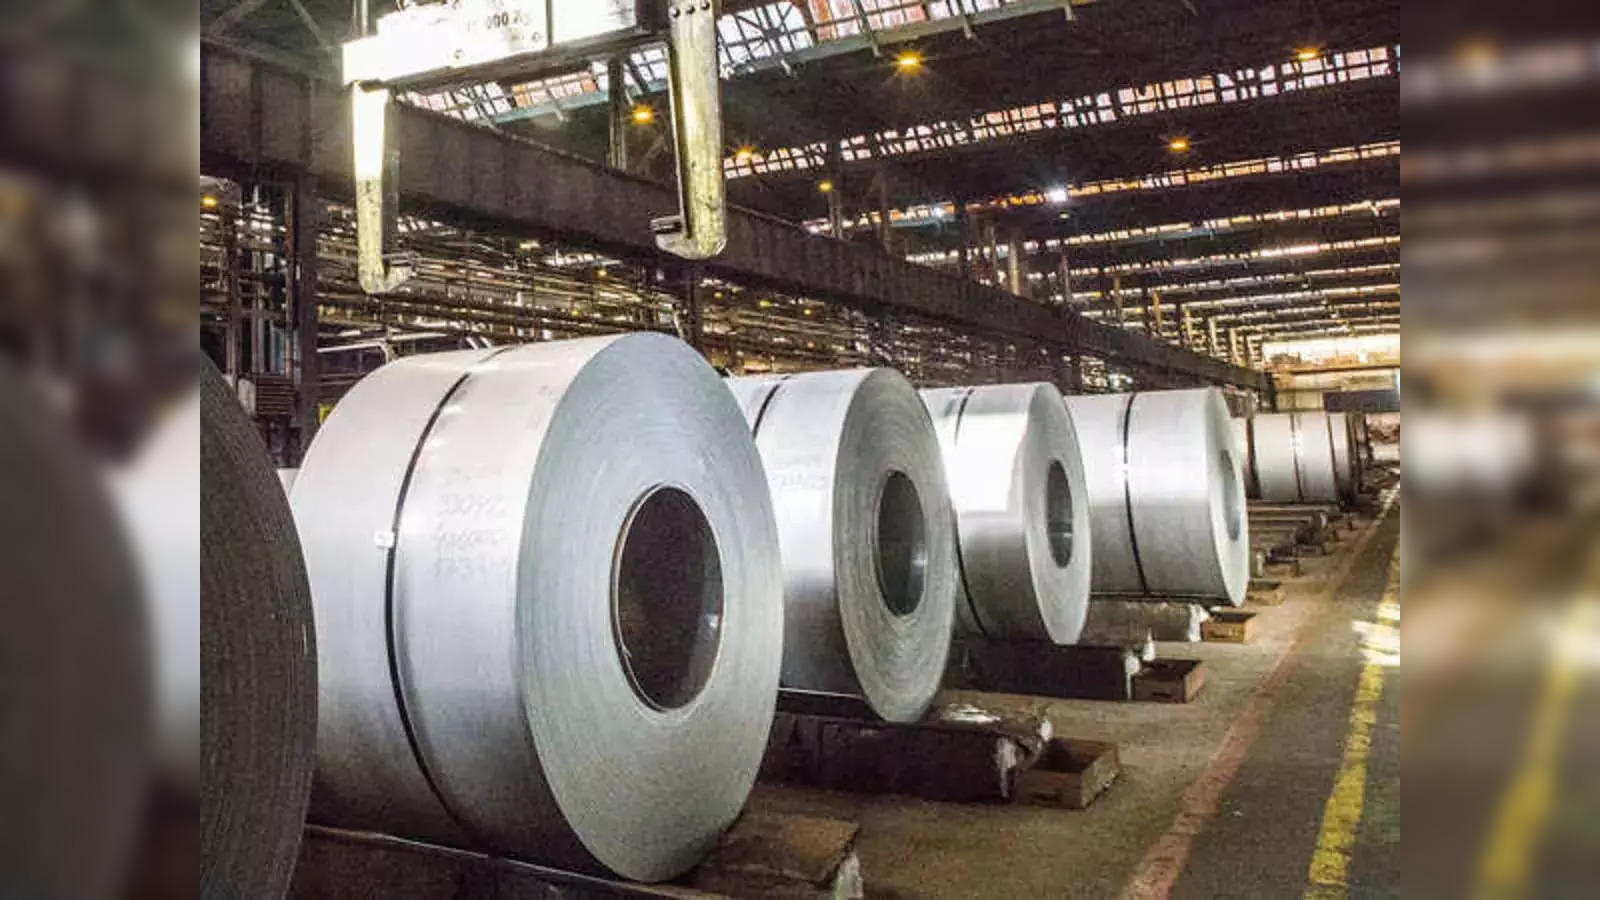 News Updates: New India-UK partnership to develop sustainable materials for  steel industry - The Economic Times